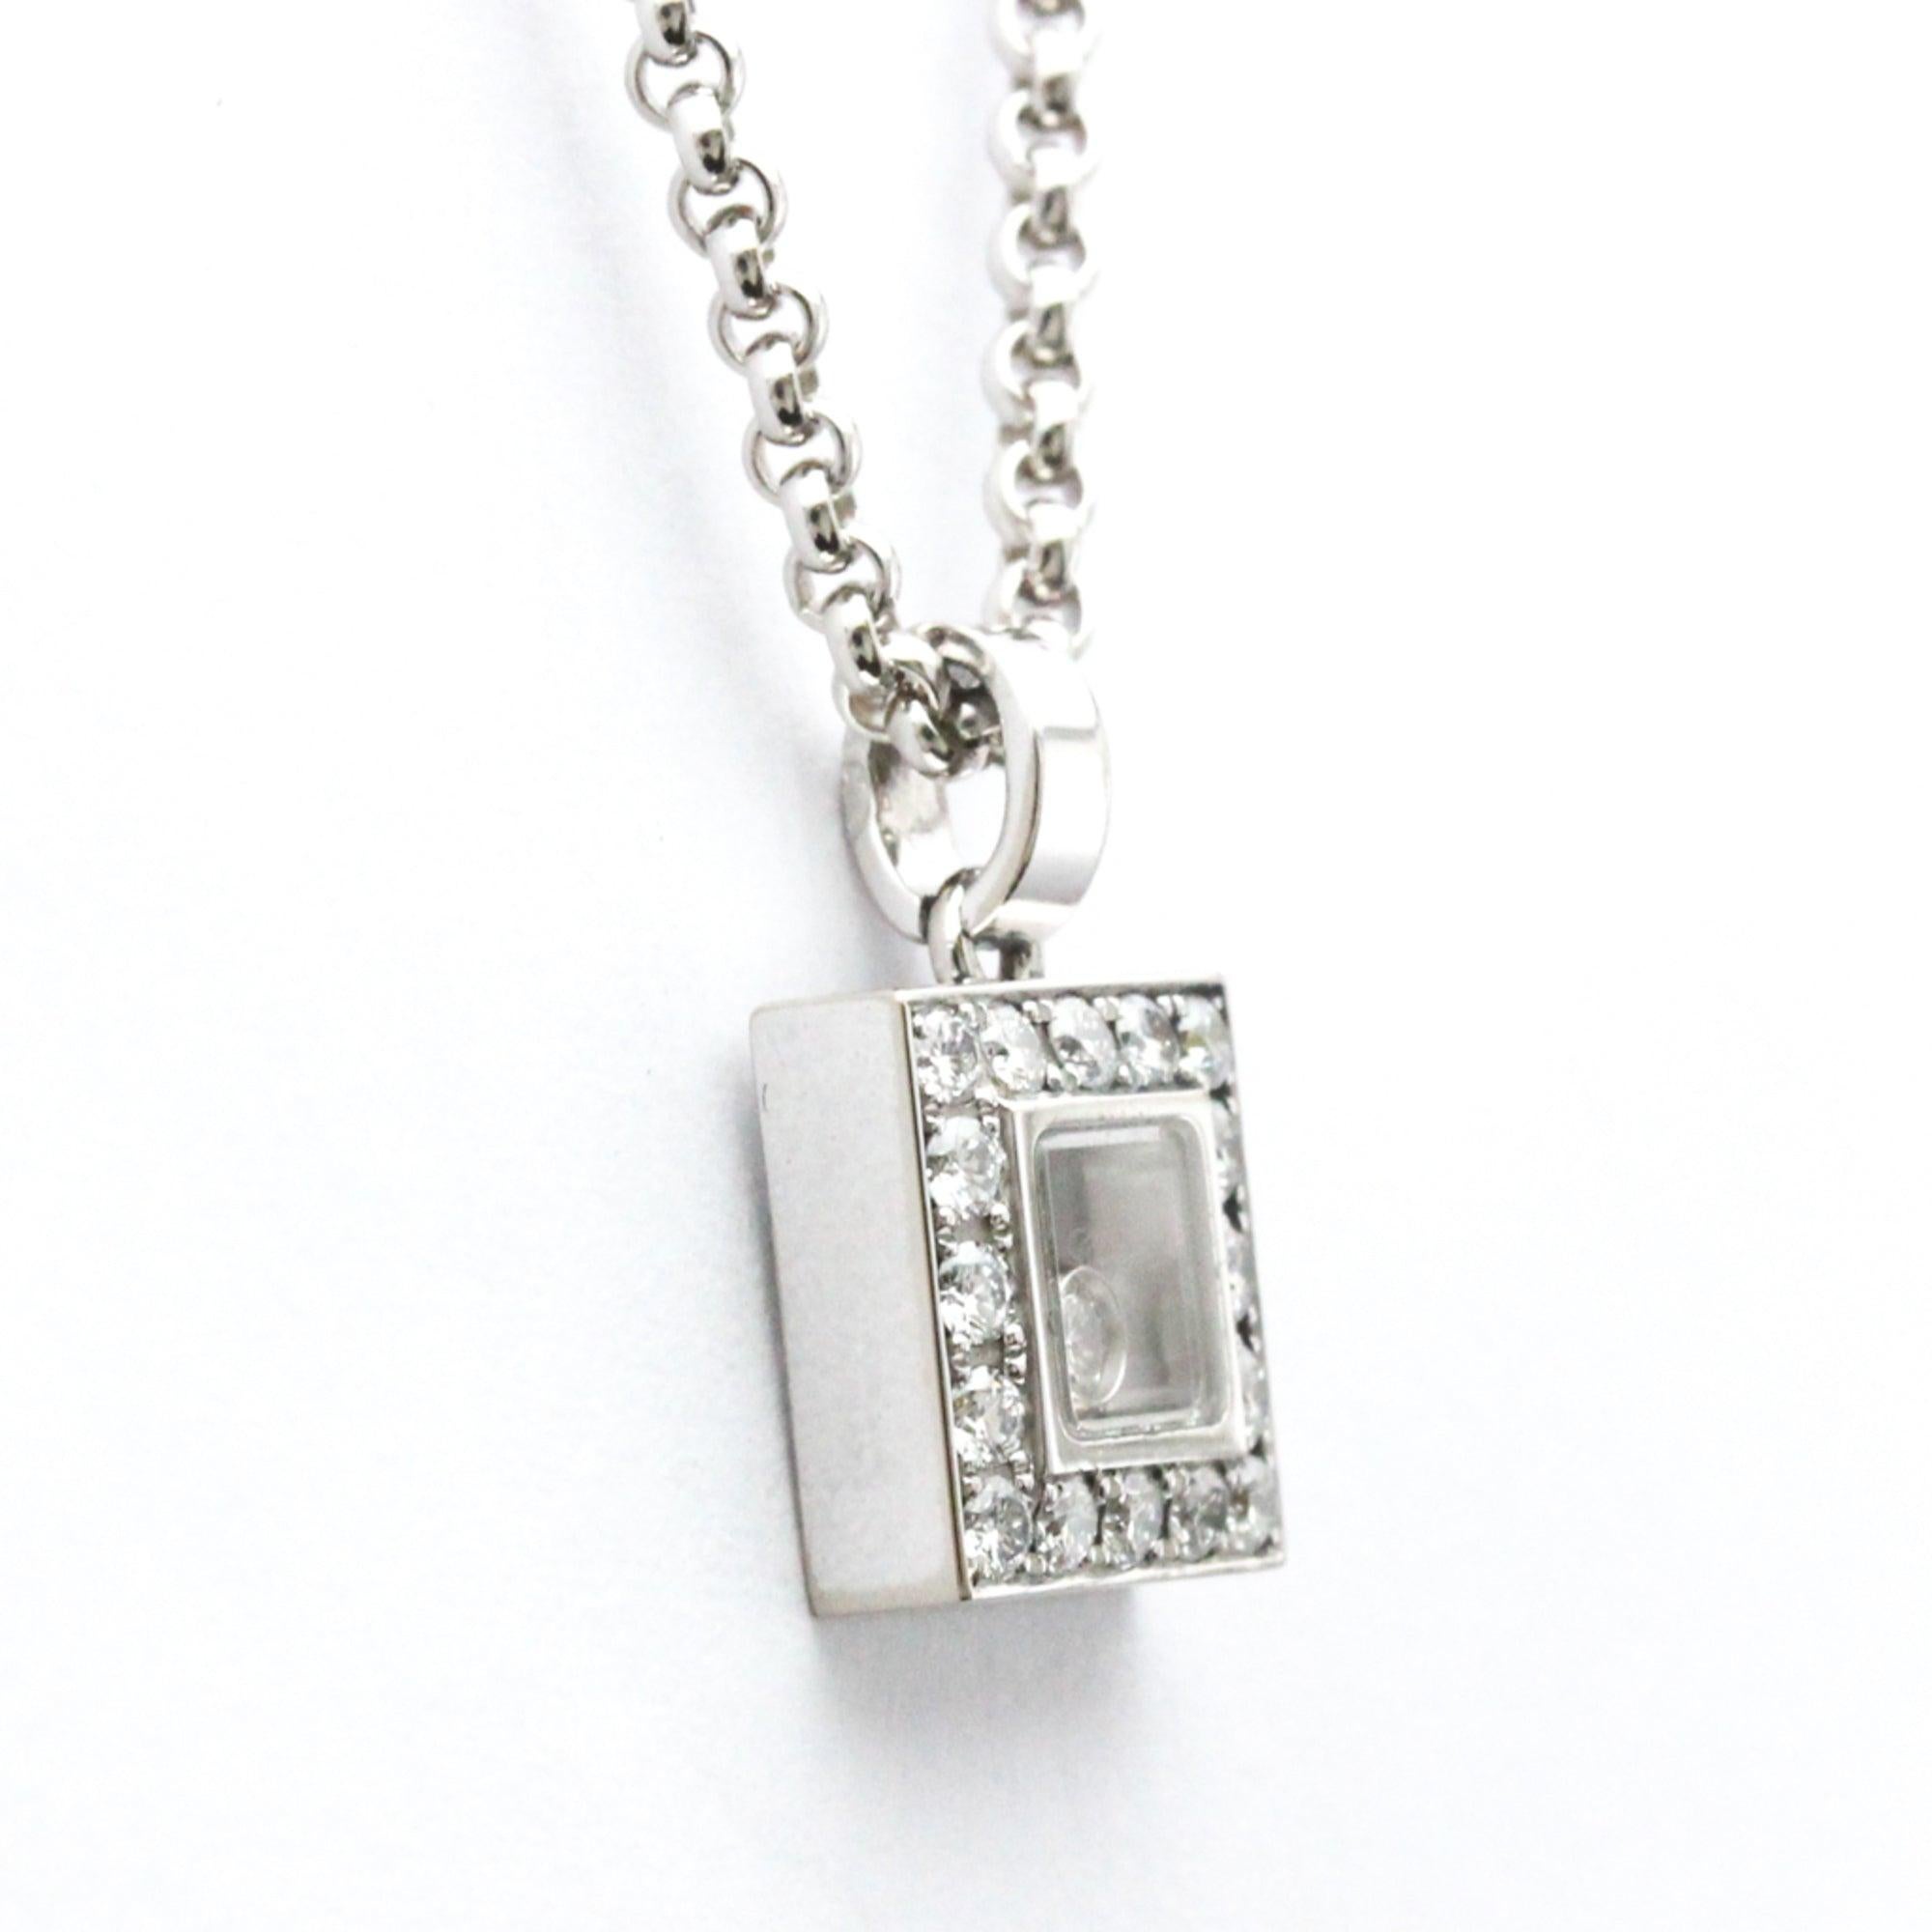 Chopard Diamond Pendant Necklace in 18K White Gold In Excellent Condition For Sale In London, GB